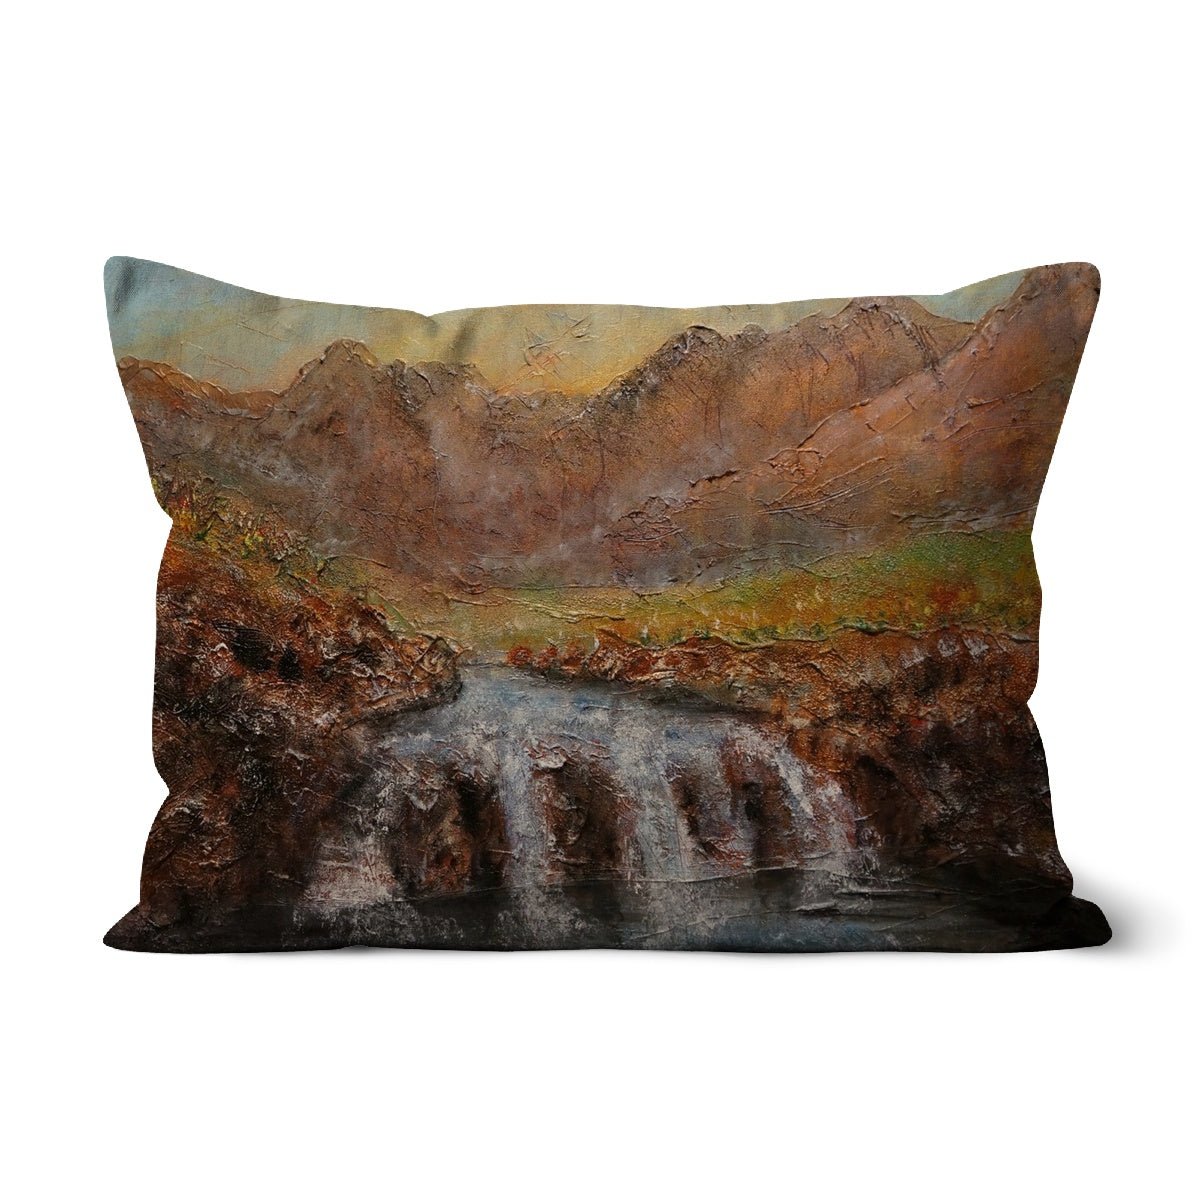 Fairy Pools Dawn Skye Art Gifts Cushion-Cushions-Skye Art Gallery-Linen-19"x13"-Paintings, Prints, Homeware, Art Gifts From Scotland By Scottish Artist Kevin Hunter